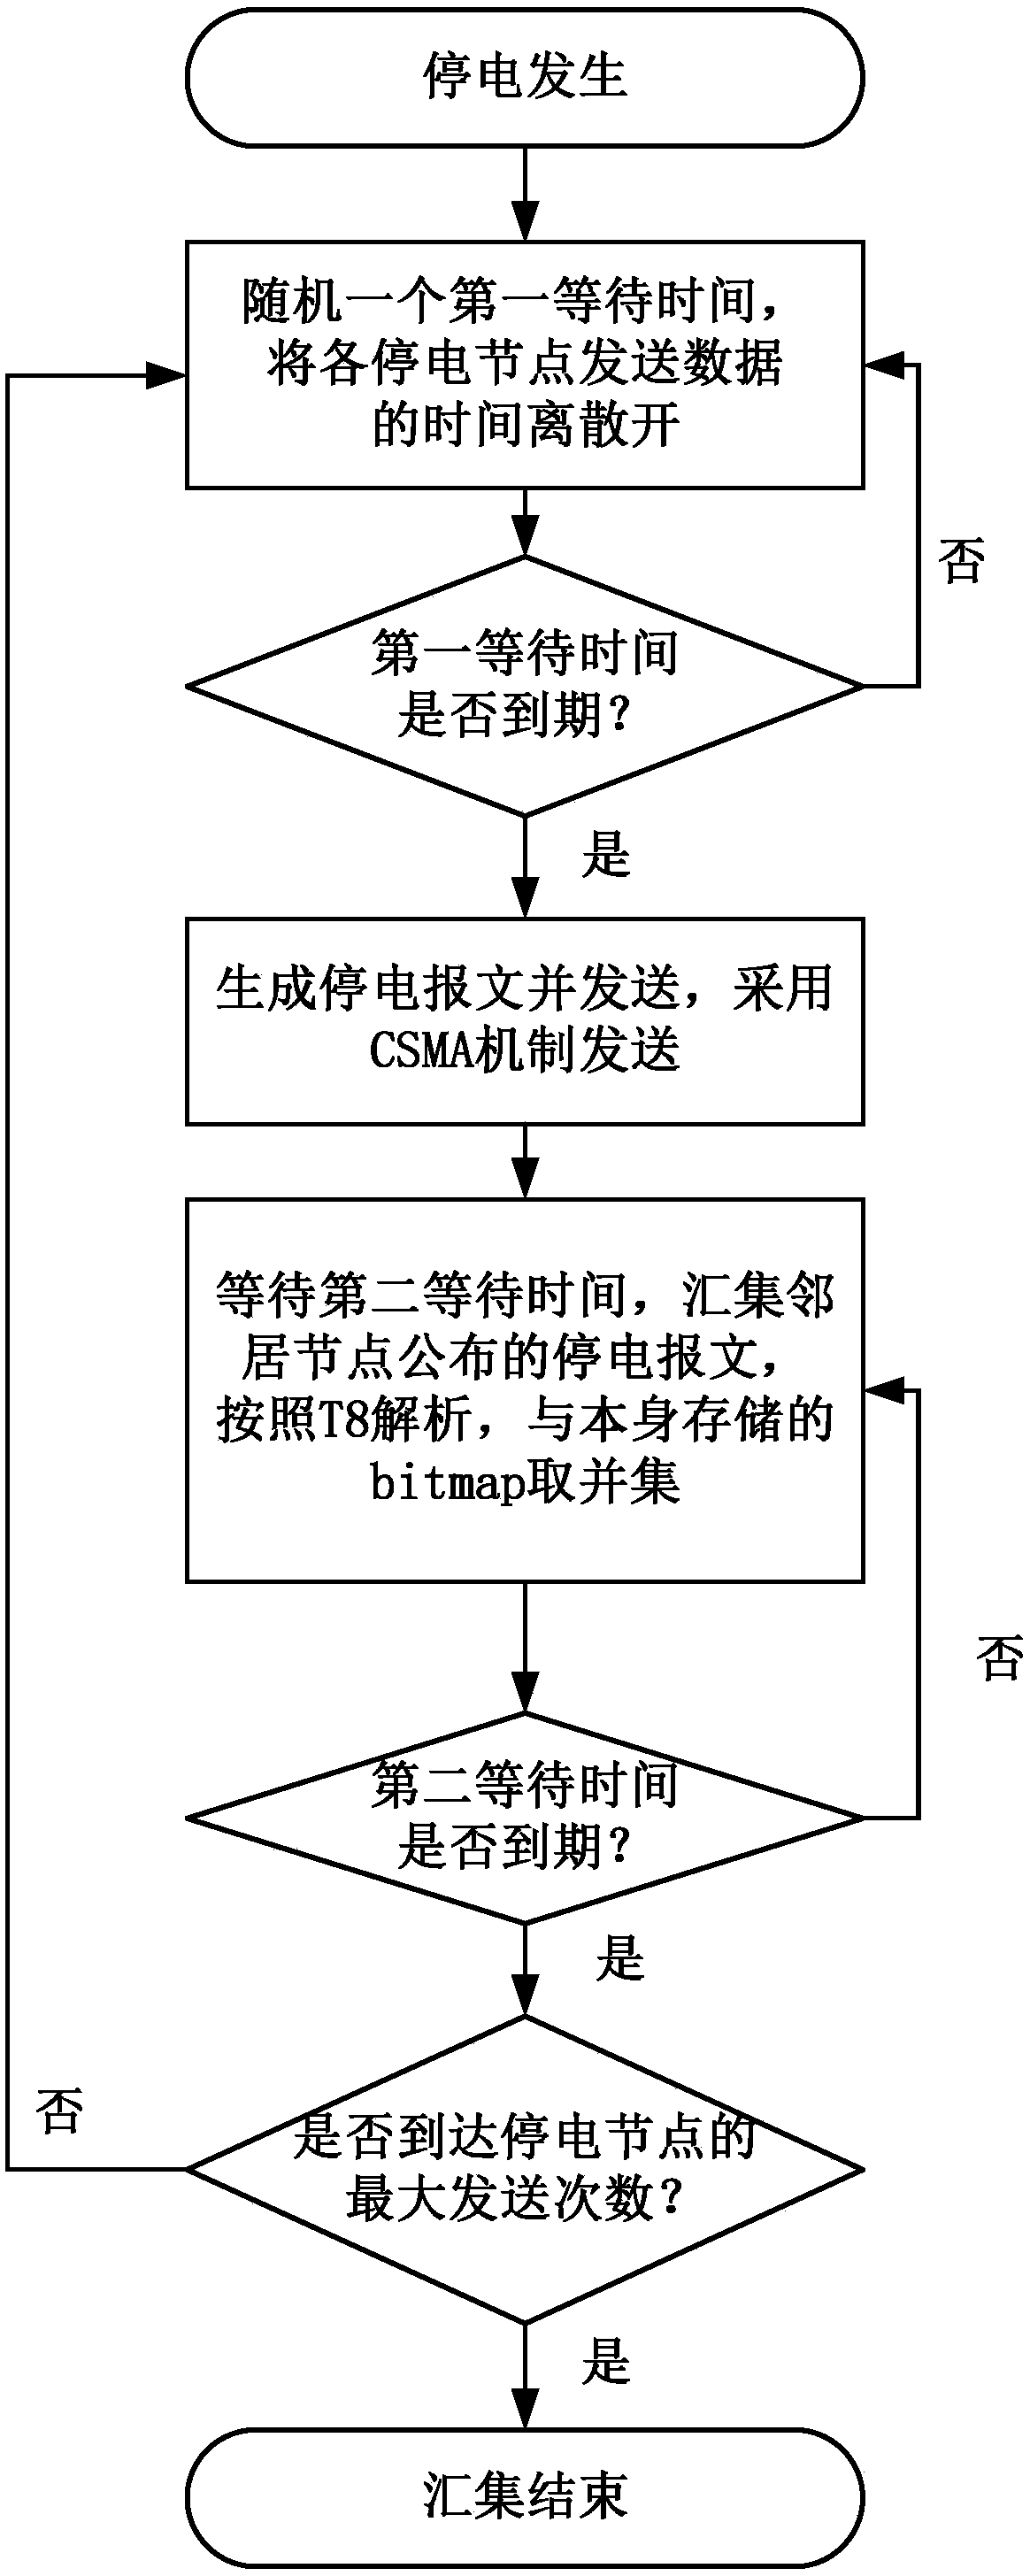 Method and system for power failure reporting of collection system